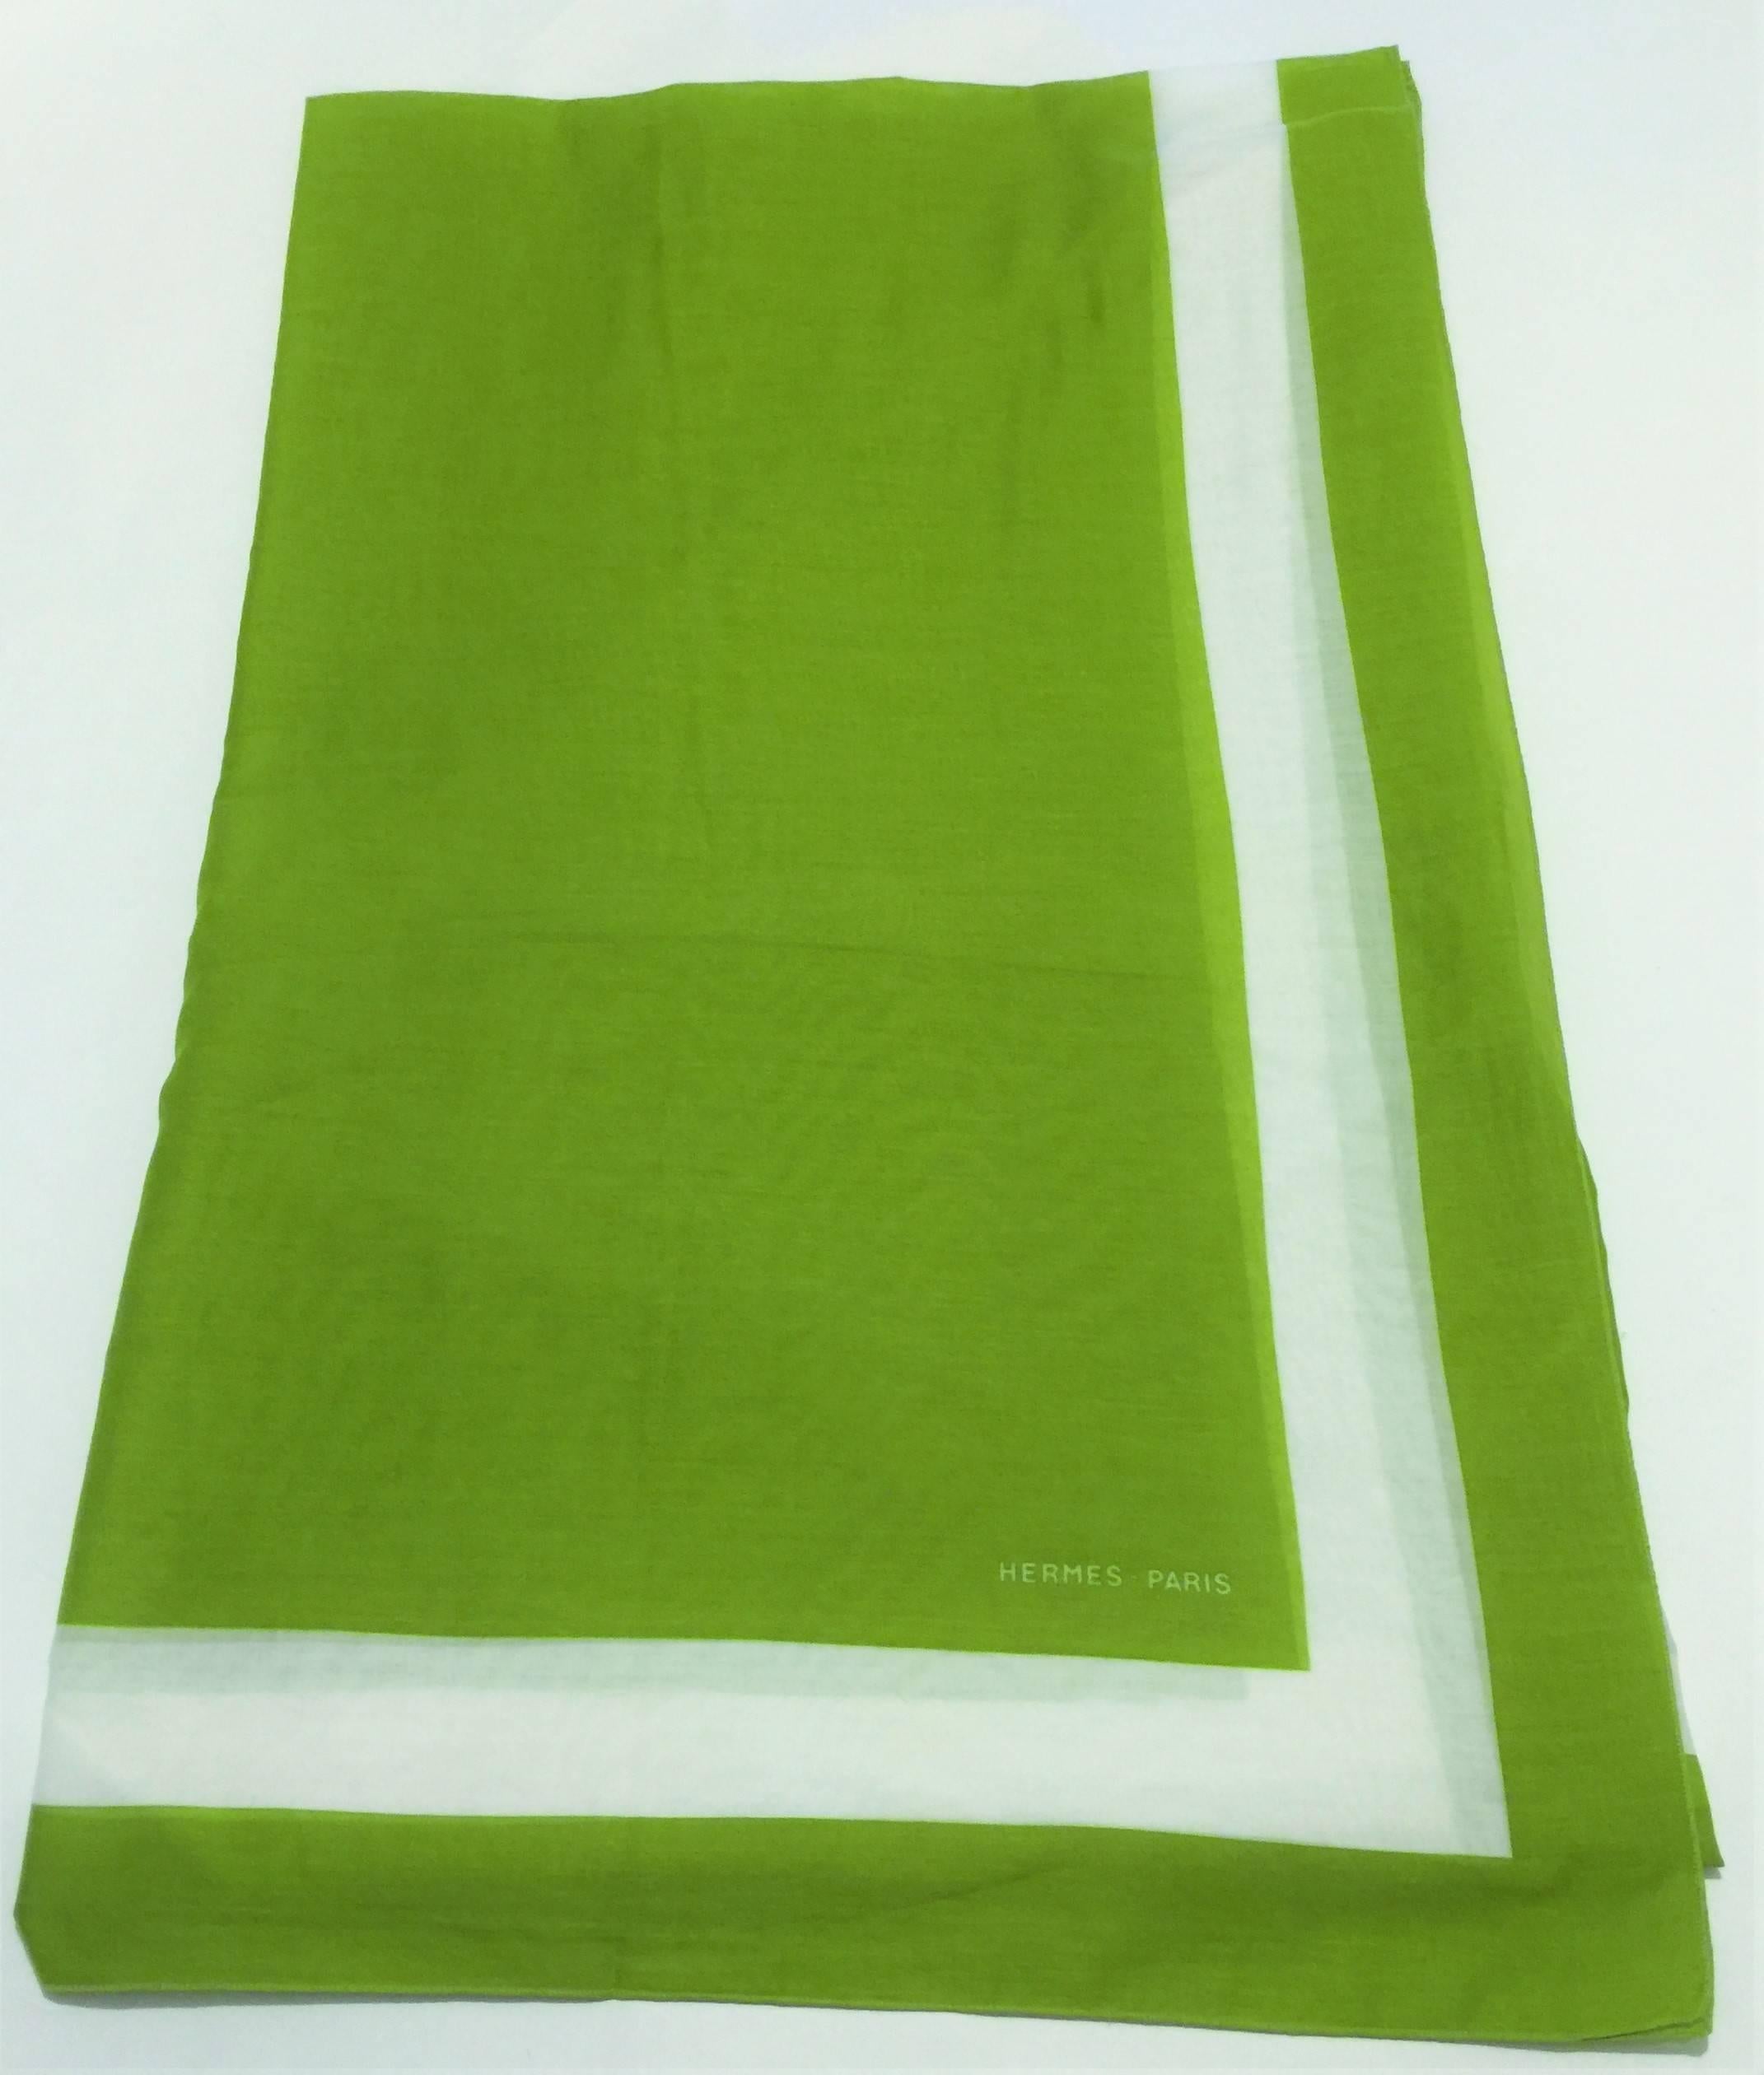 Hermes Plain Yachting Beach Cover-Up.  100% Cotton Muslin. Signature Hermes Beach Cover-Up in Lime Green with White Border.  Size 55 inches by 69 inches or 146cm by 176cm.  Made in France.  It is ideal for Pool/Beachside cover-up and a truly lovely